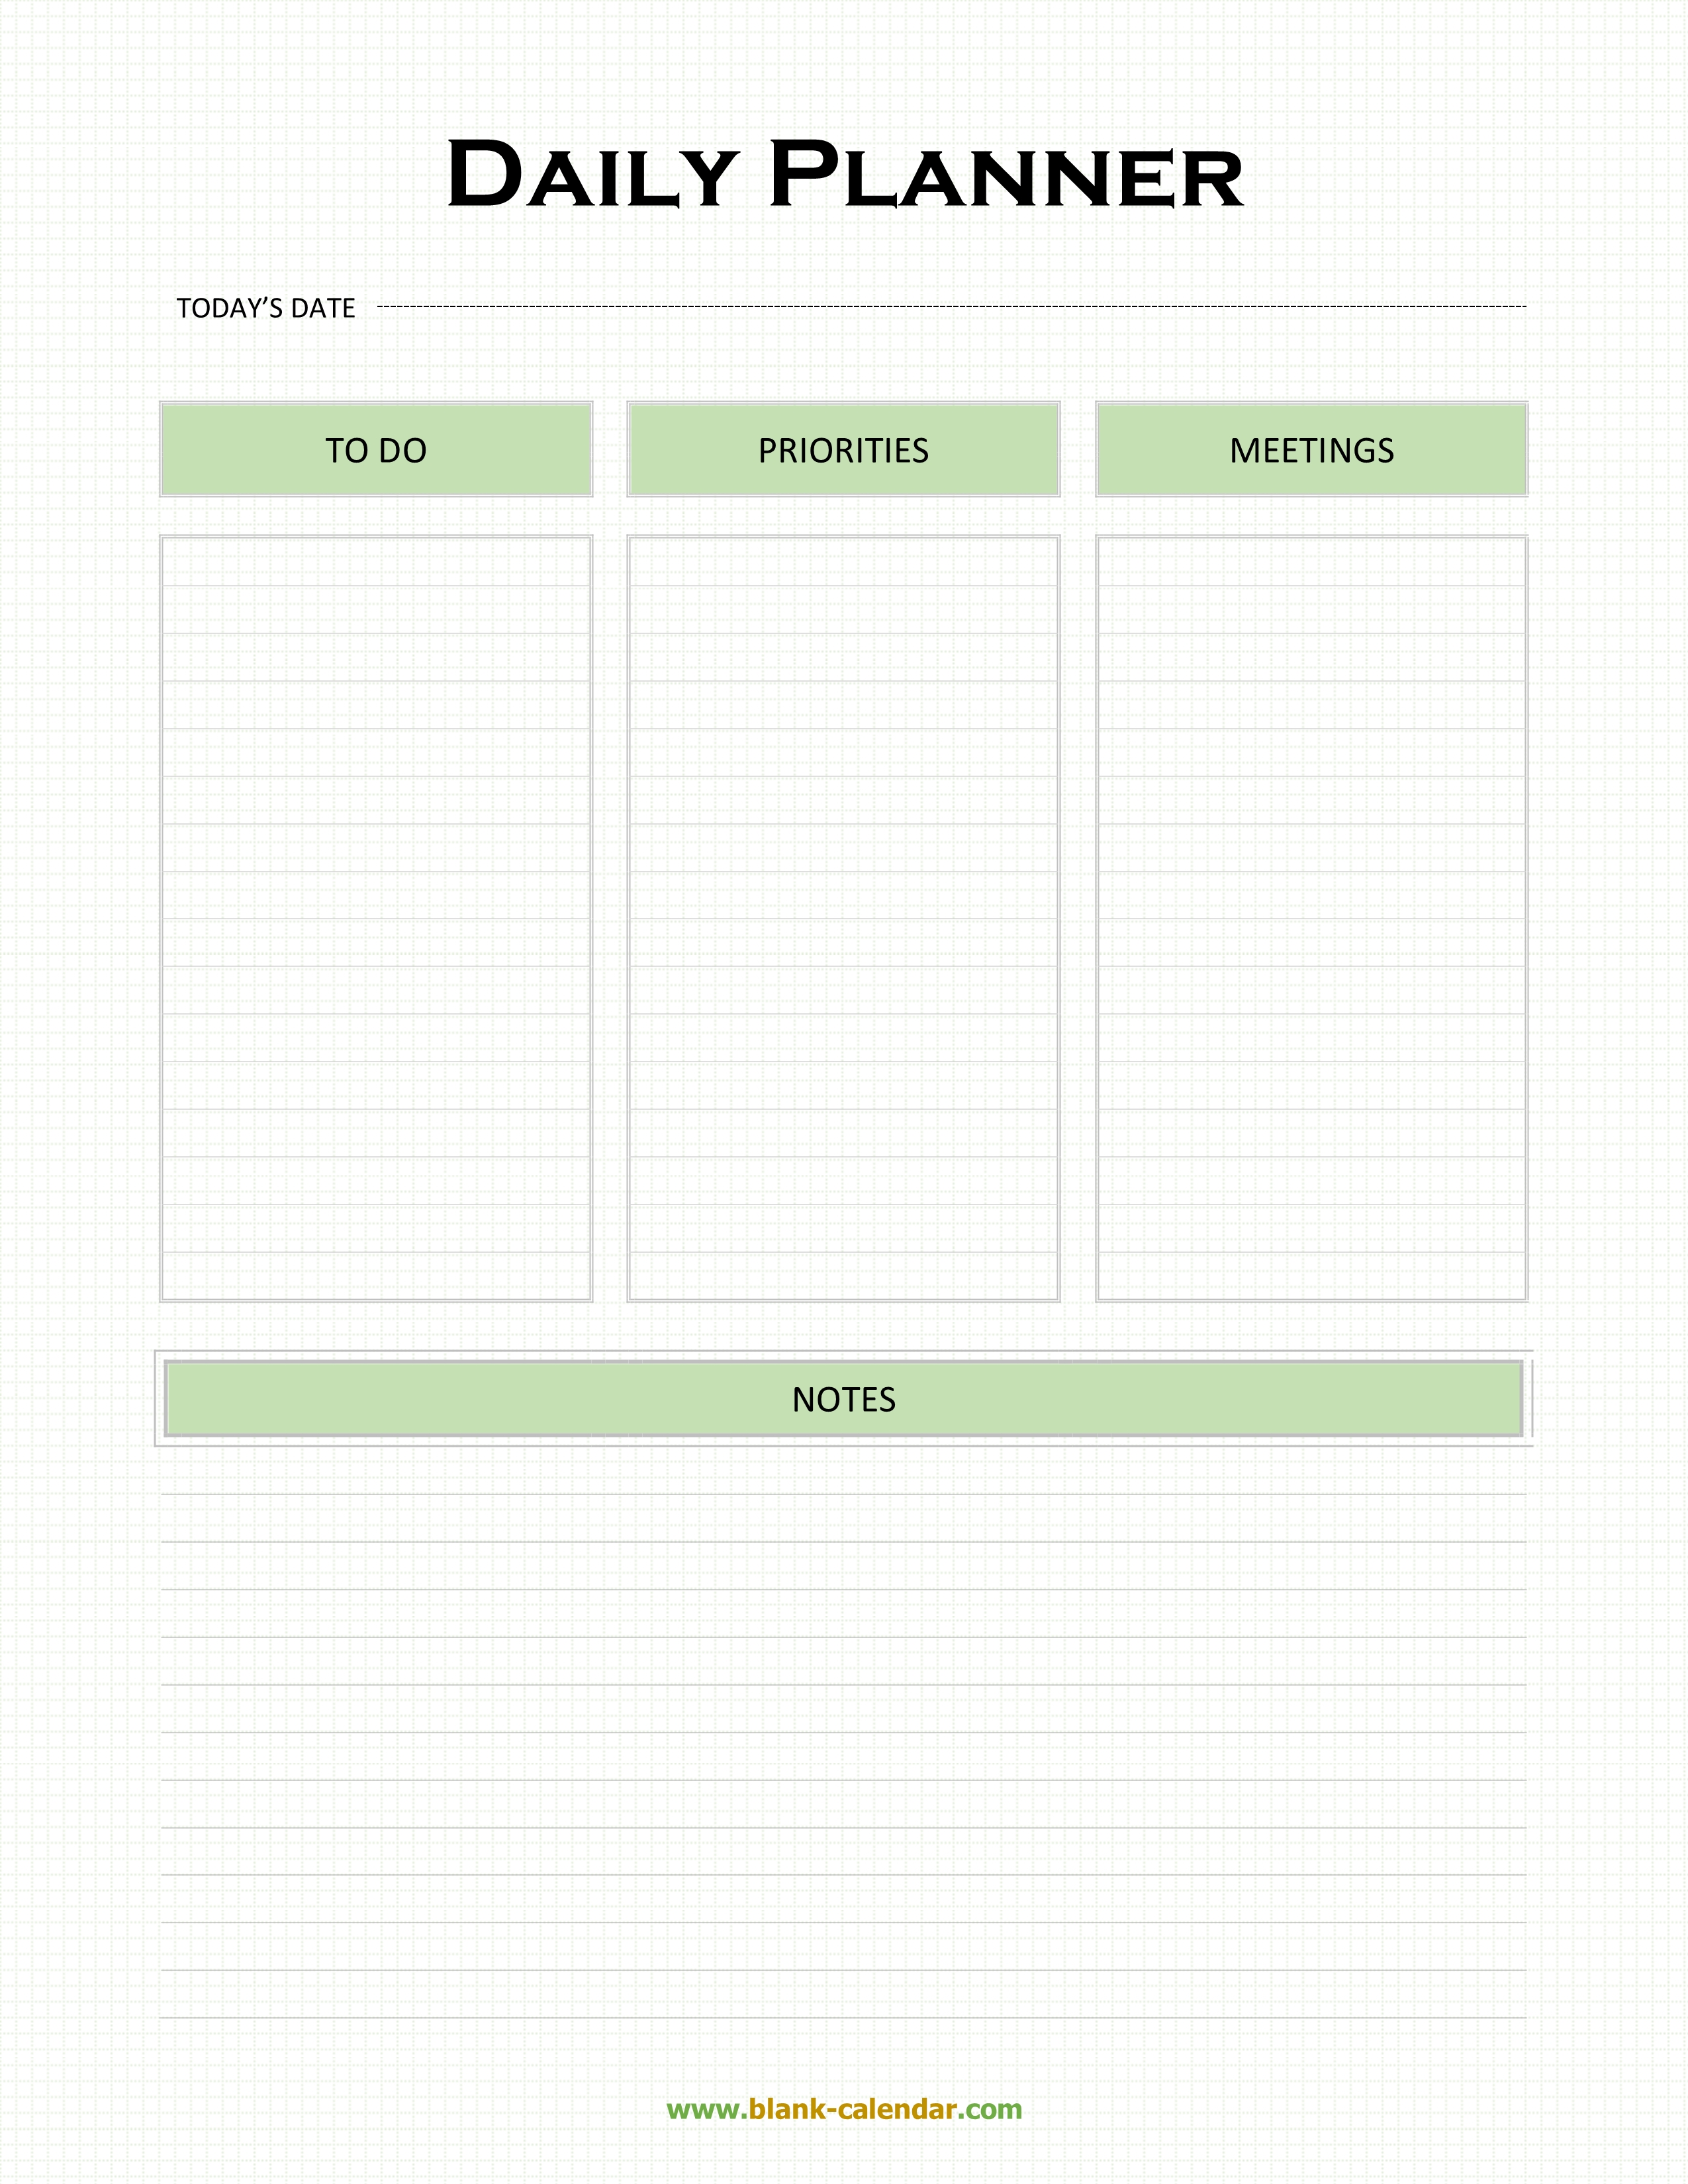 Daily Planner Templates (WORD, EXCEL, PDF) With Printable Blank Daily Schedule Template